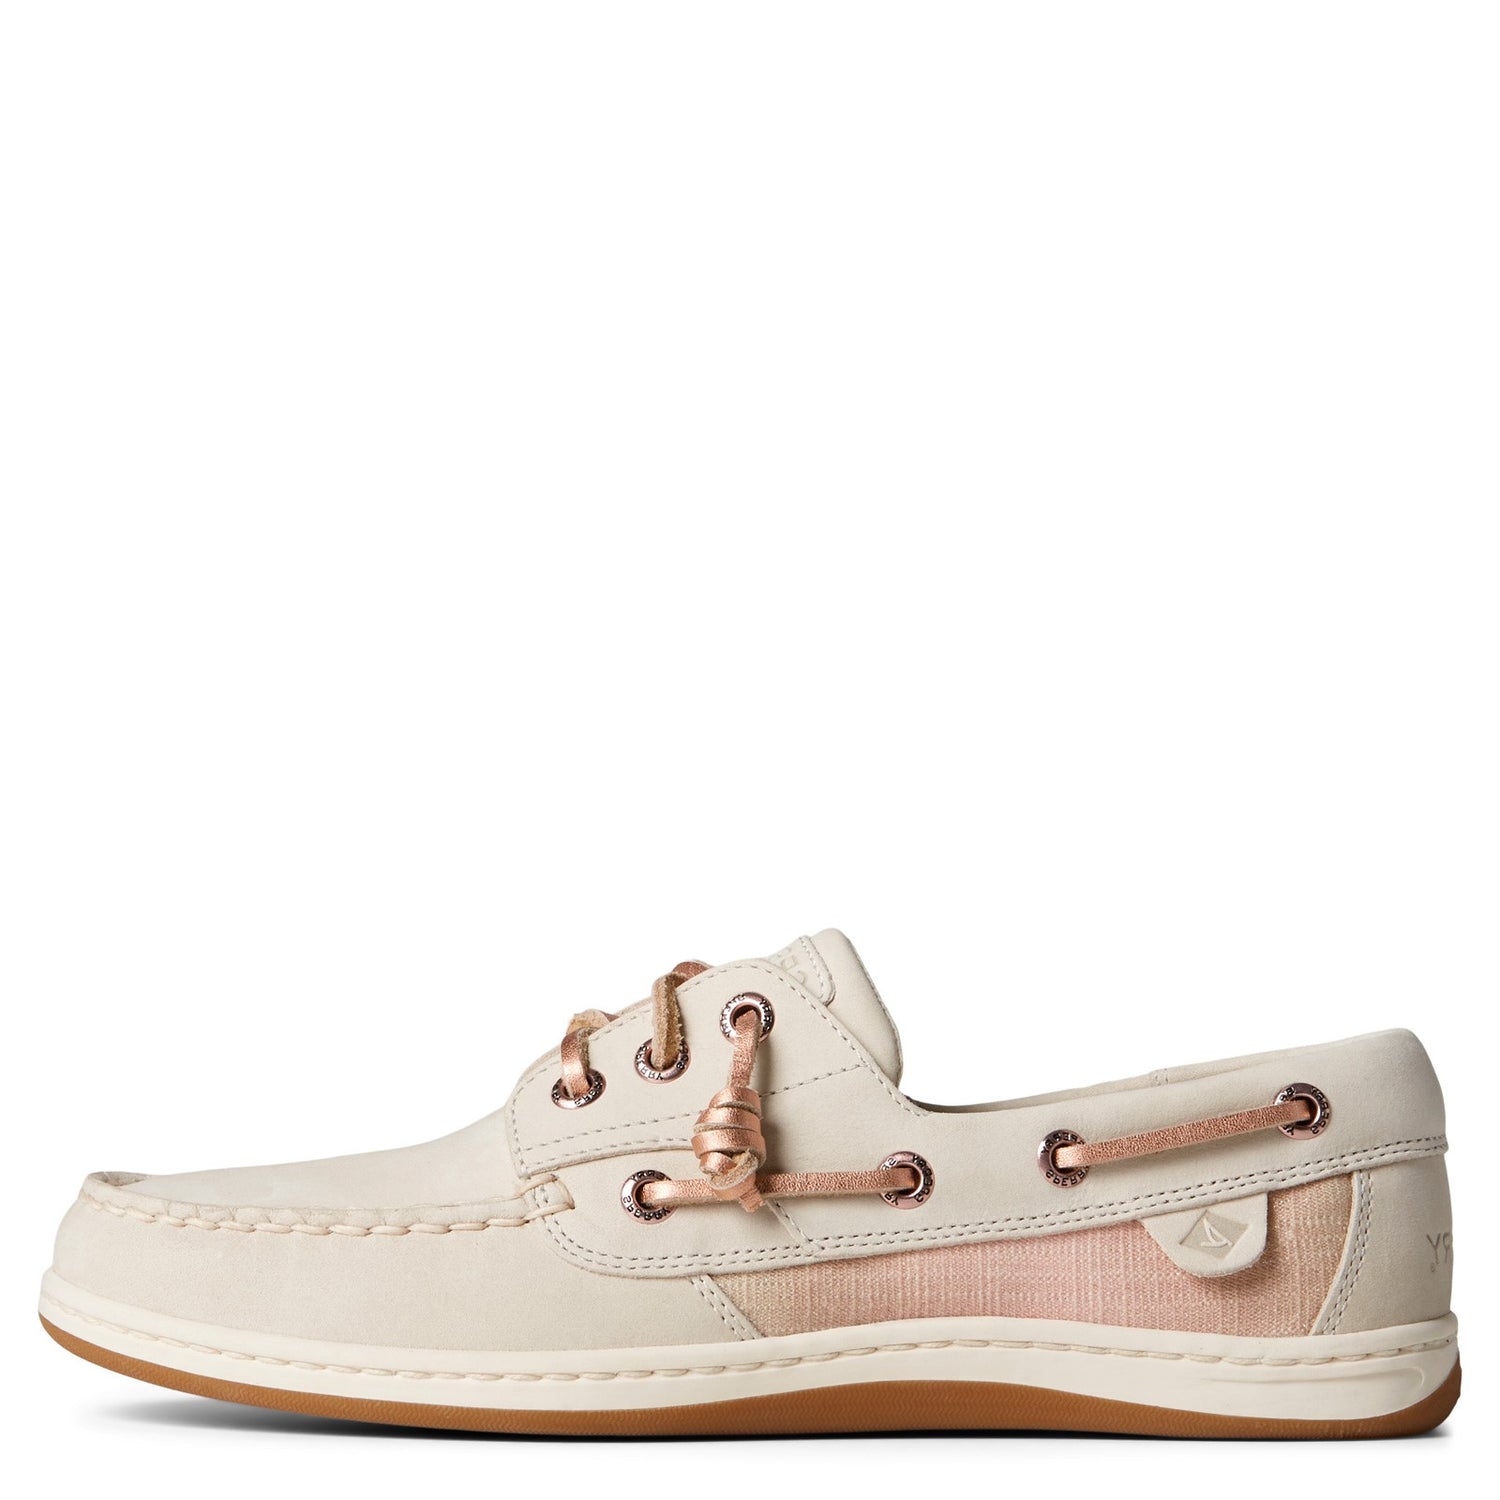 Peltz Shoes  Women's Sperry Songfish Boat Shoe OFF WHITE MULTI STS88613